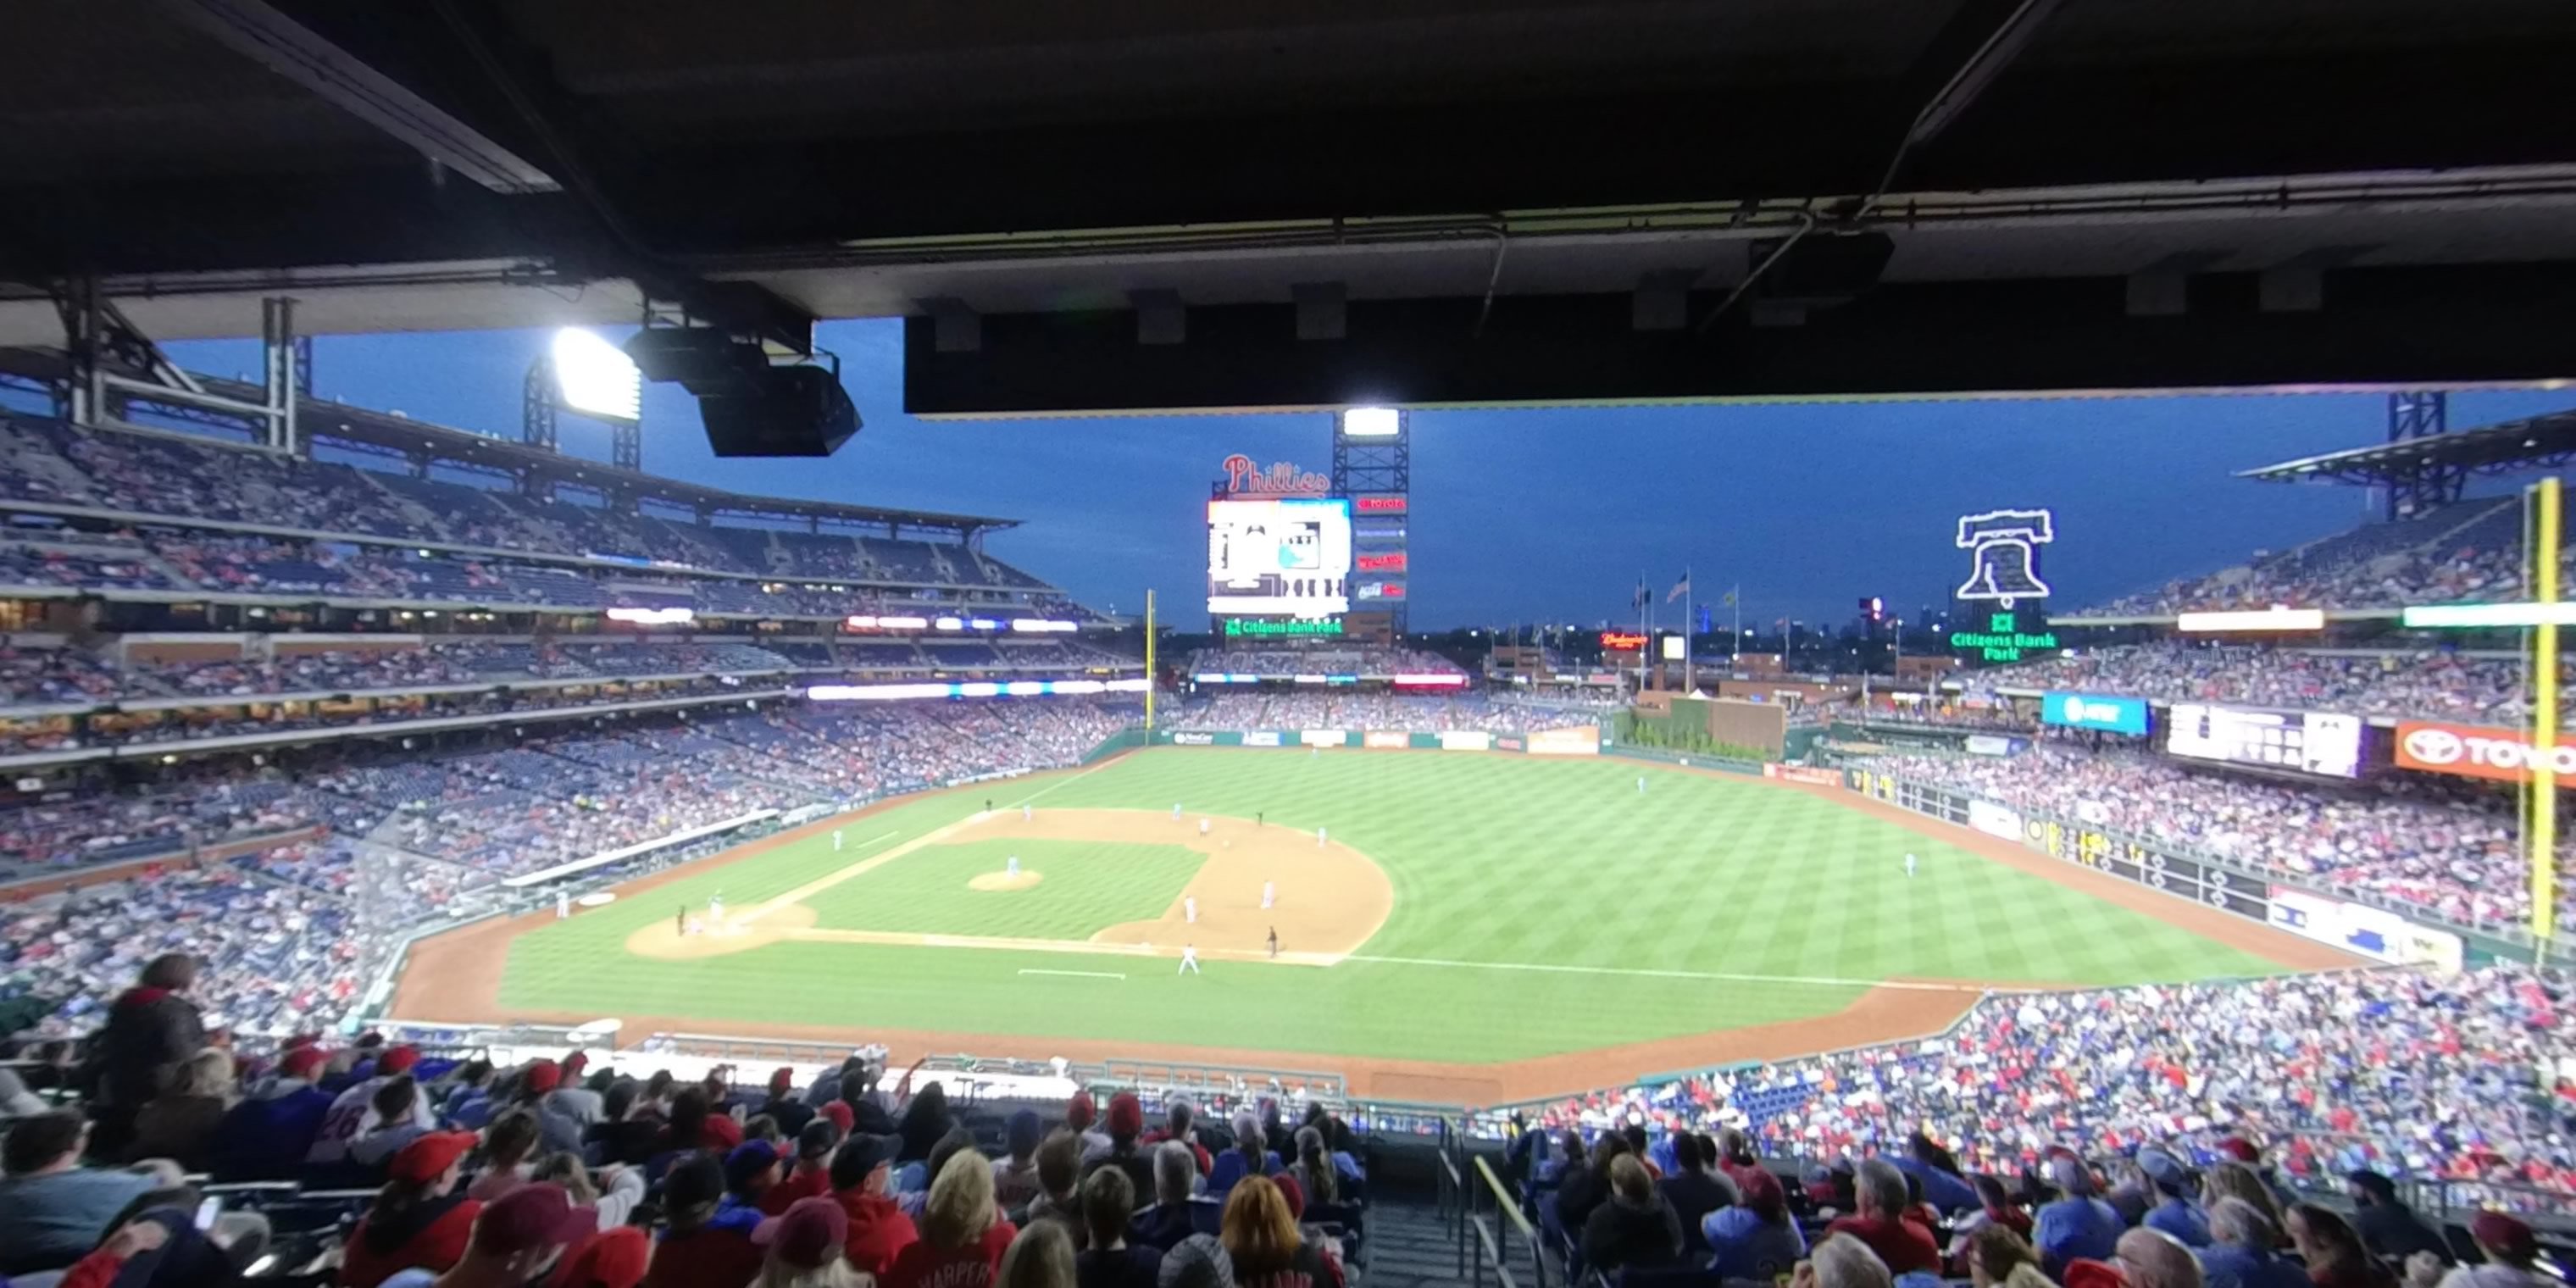 section 213 panoramic seat view  for baseball - citizens bank park